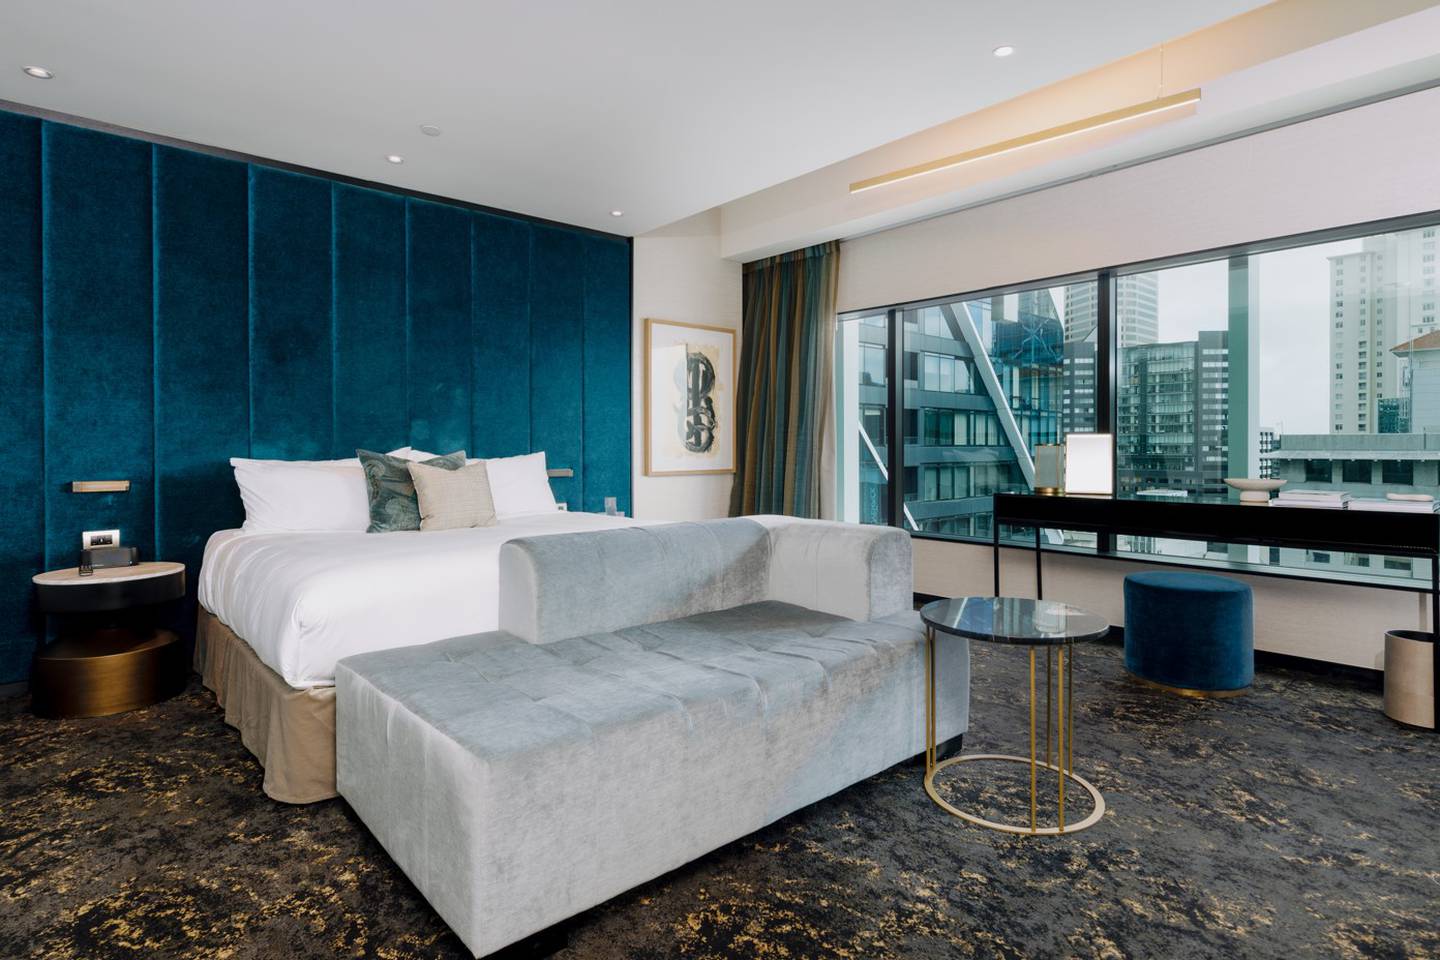 The SO/ Auckland x Superette suite' bedroom includes a unique blend of luxury hospitality and chic homeware.